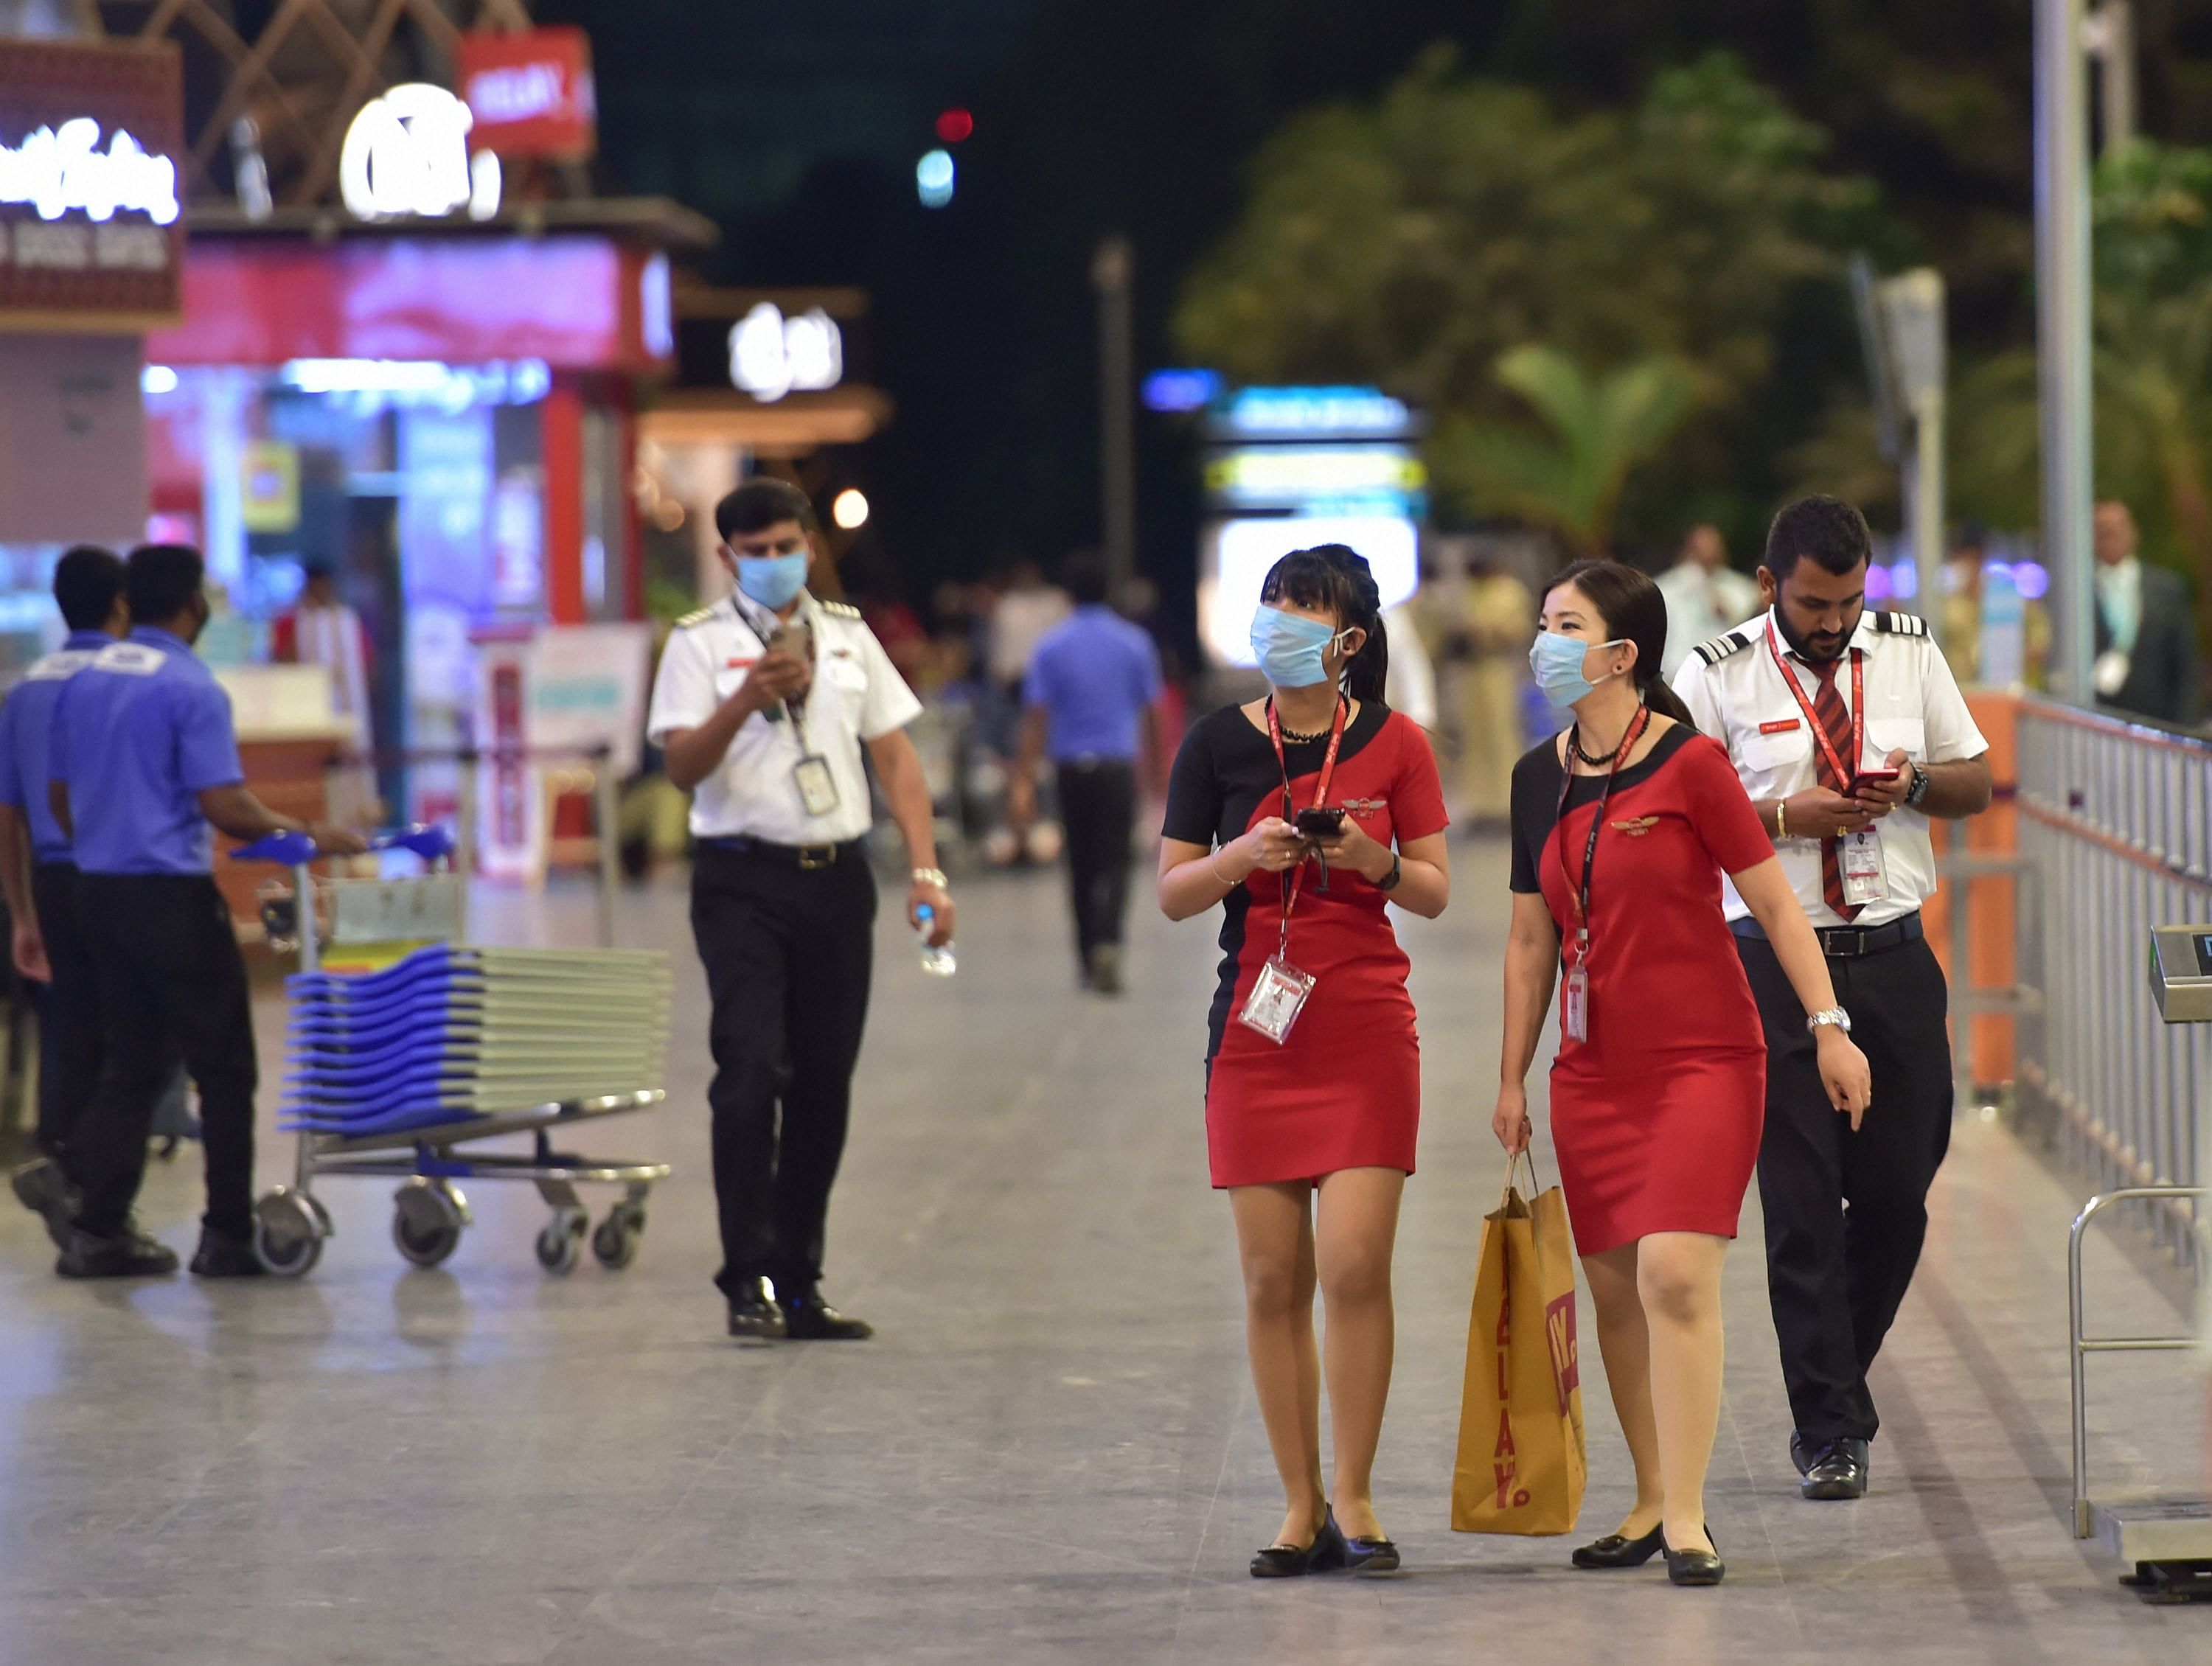 Out of 42 cases detected and confirmed in Karnataka, so far six cases are transit passengers of Kerala who have landed in airports and being treated in Karnataka.(Credit: PTI Photo)